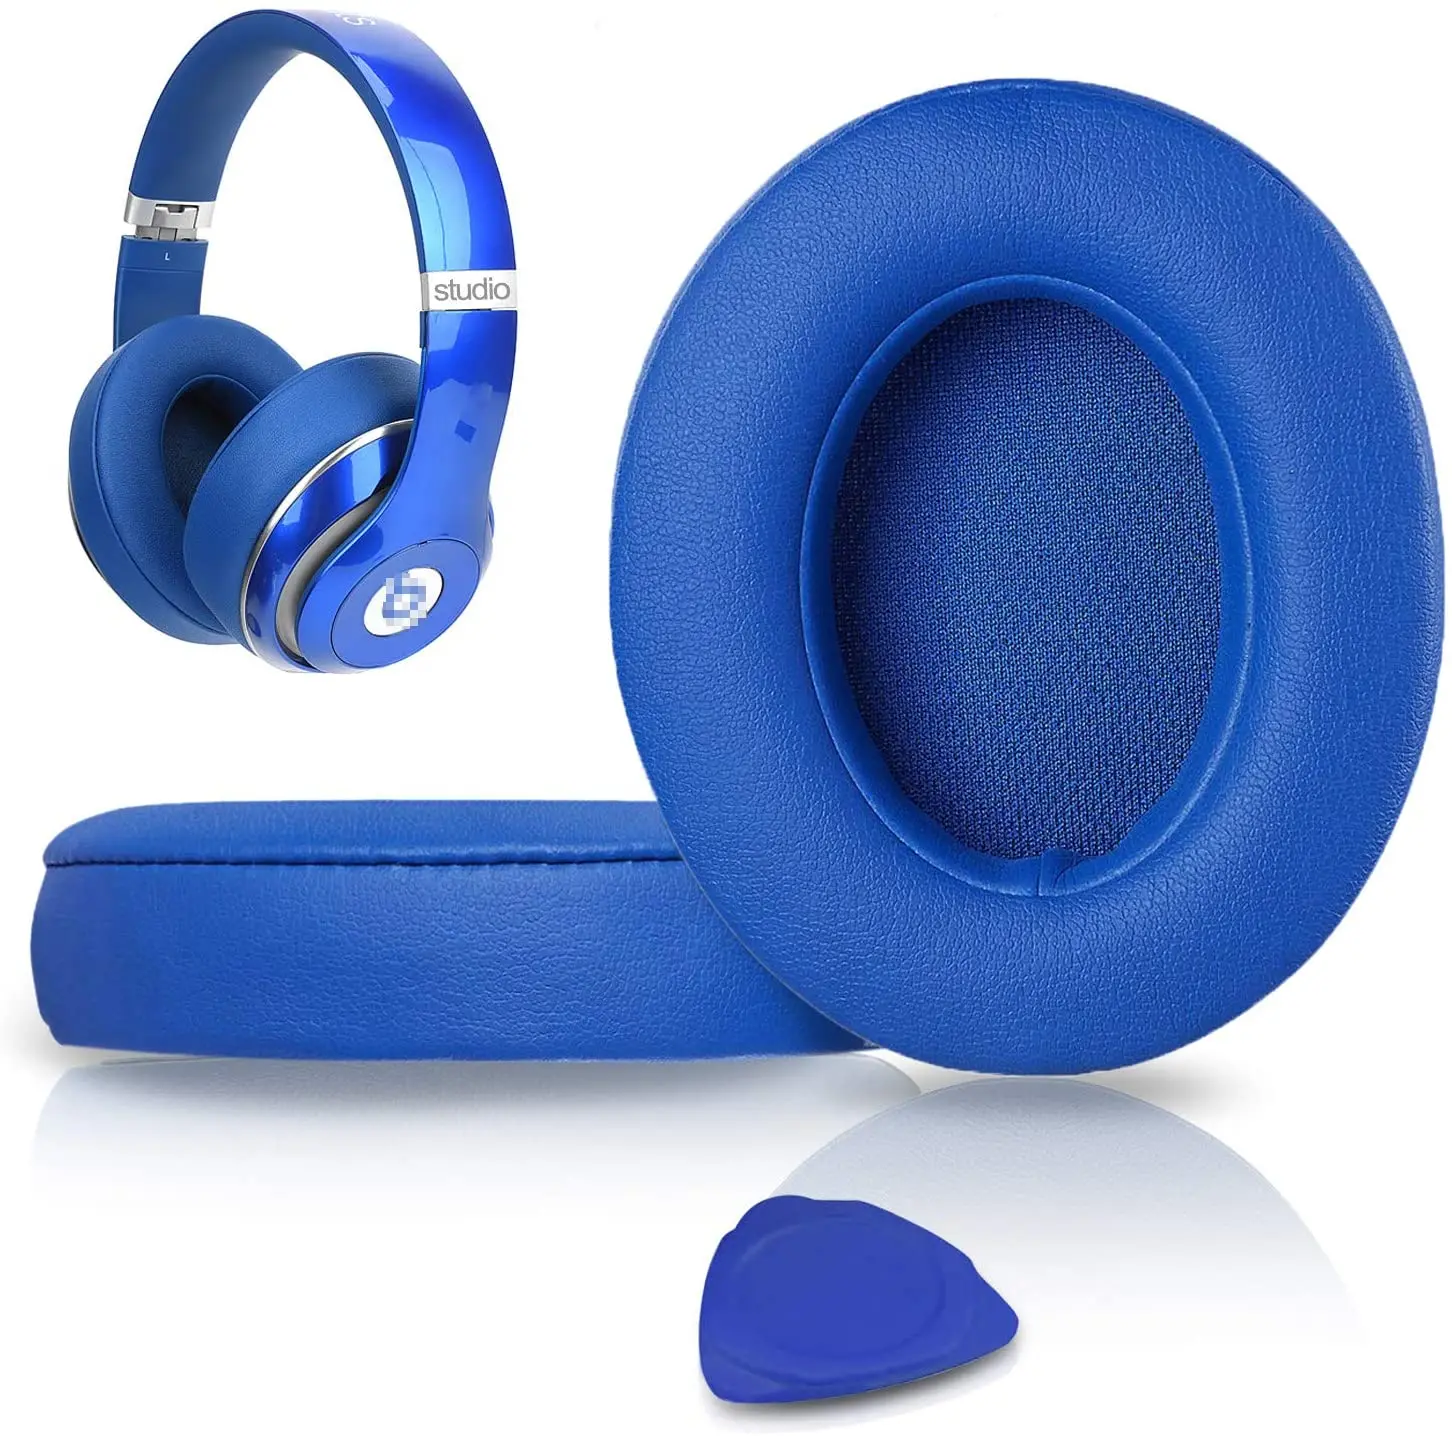 How to Choose Best Earpad Covers for Beats Headphones: Top 10 Buying Tips for Studio, Solo & Pro